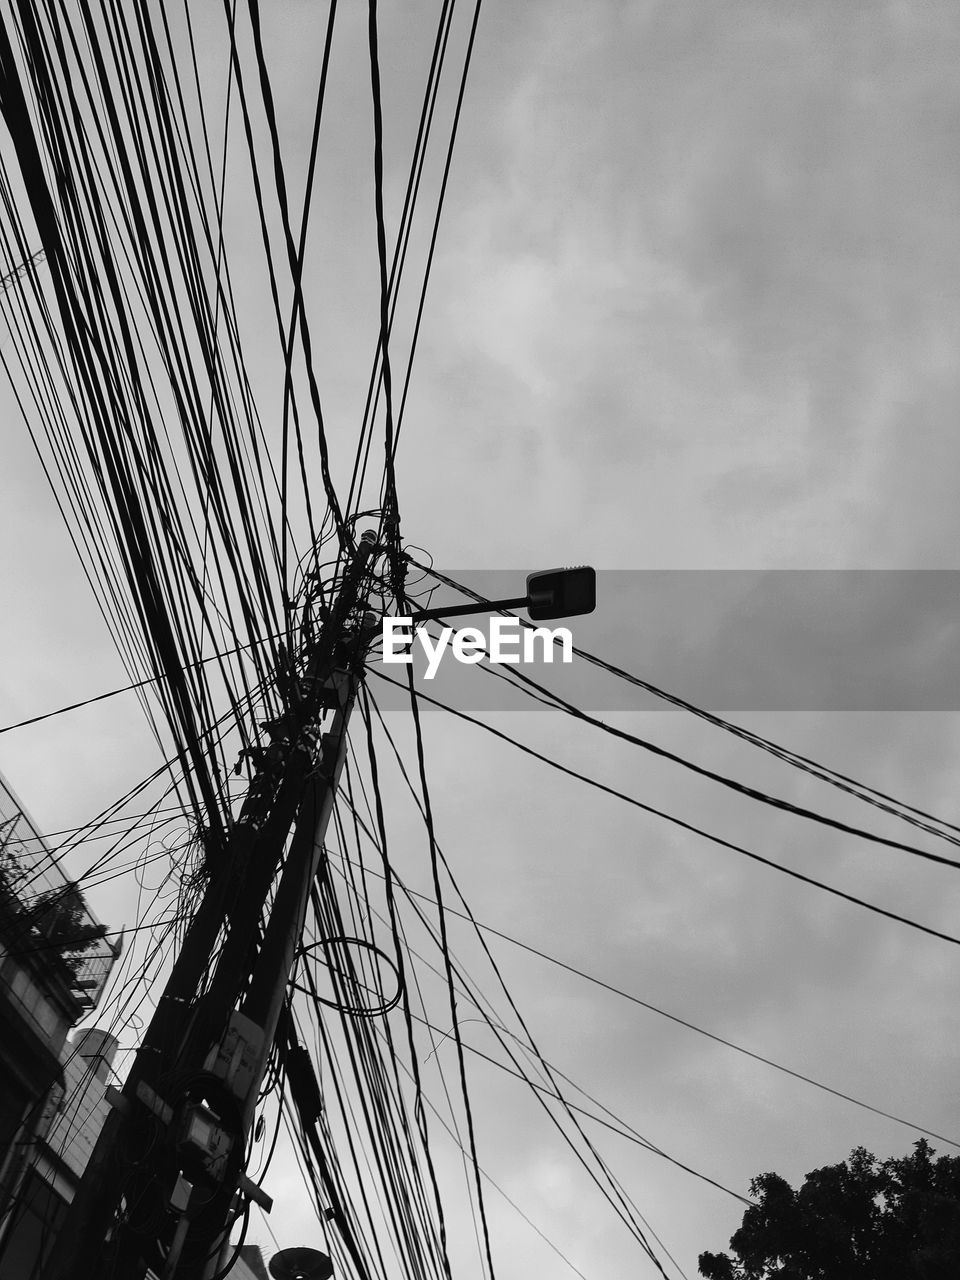 sky, black and white, monochrome photography, cloud, monochrome, cable, line, low angle view, nature, architecture, transportation, no people, vehicle, mast, electricity, sailboat, pole, built structure, mode of transportation, outdoors, city, ship, overhead power line, complexity, day, technology, black, rope, nautical vessel